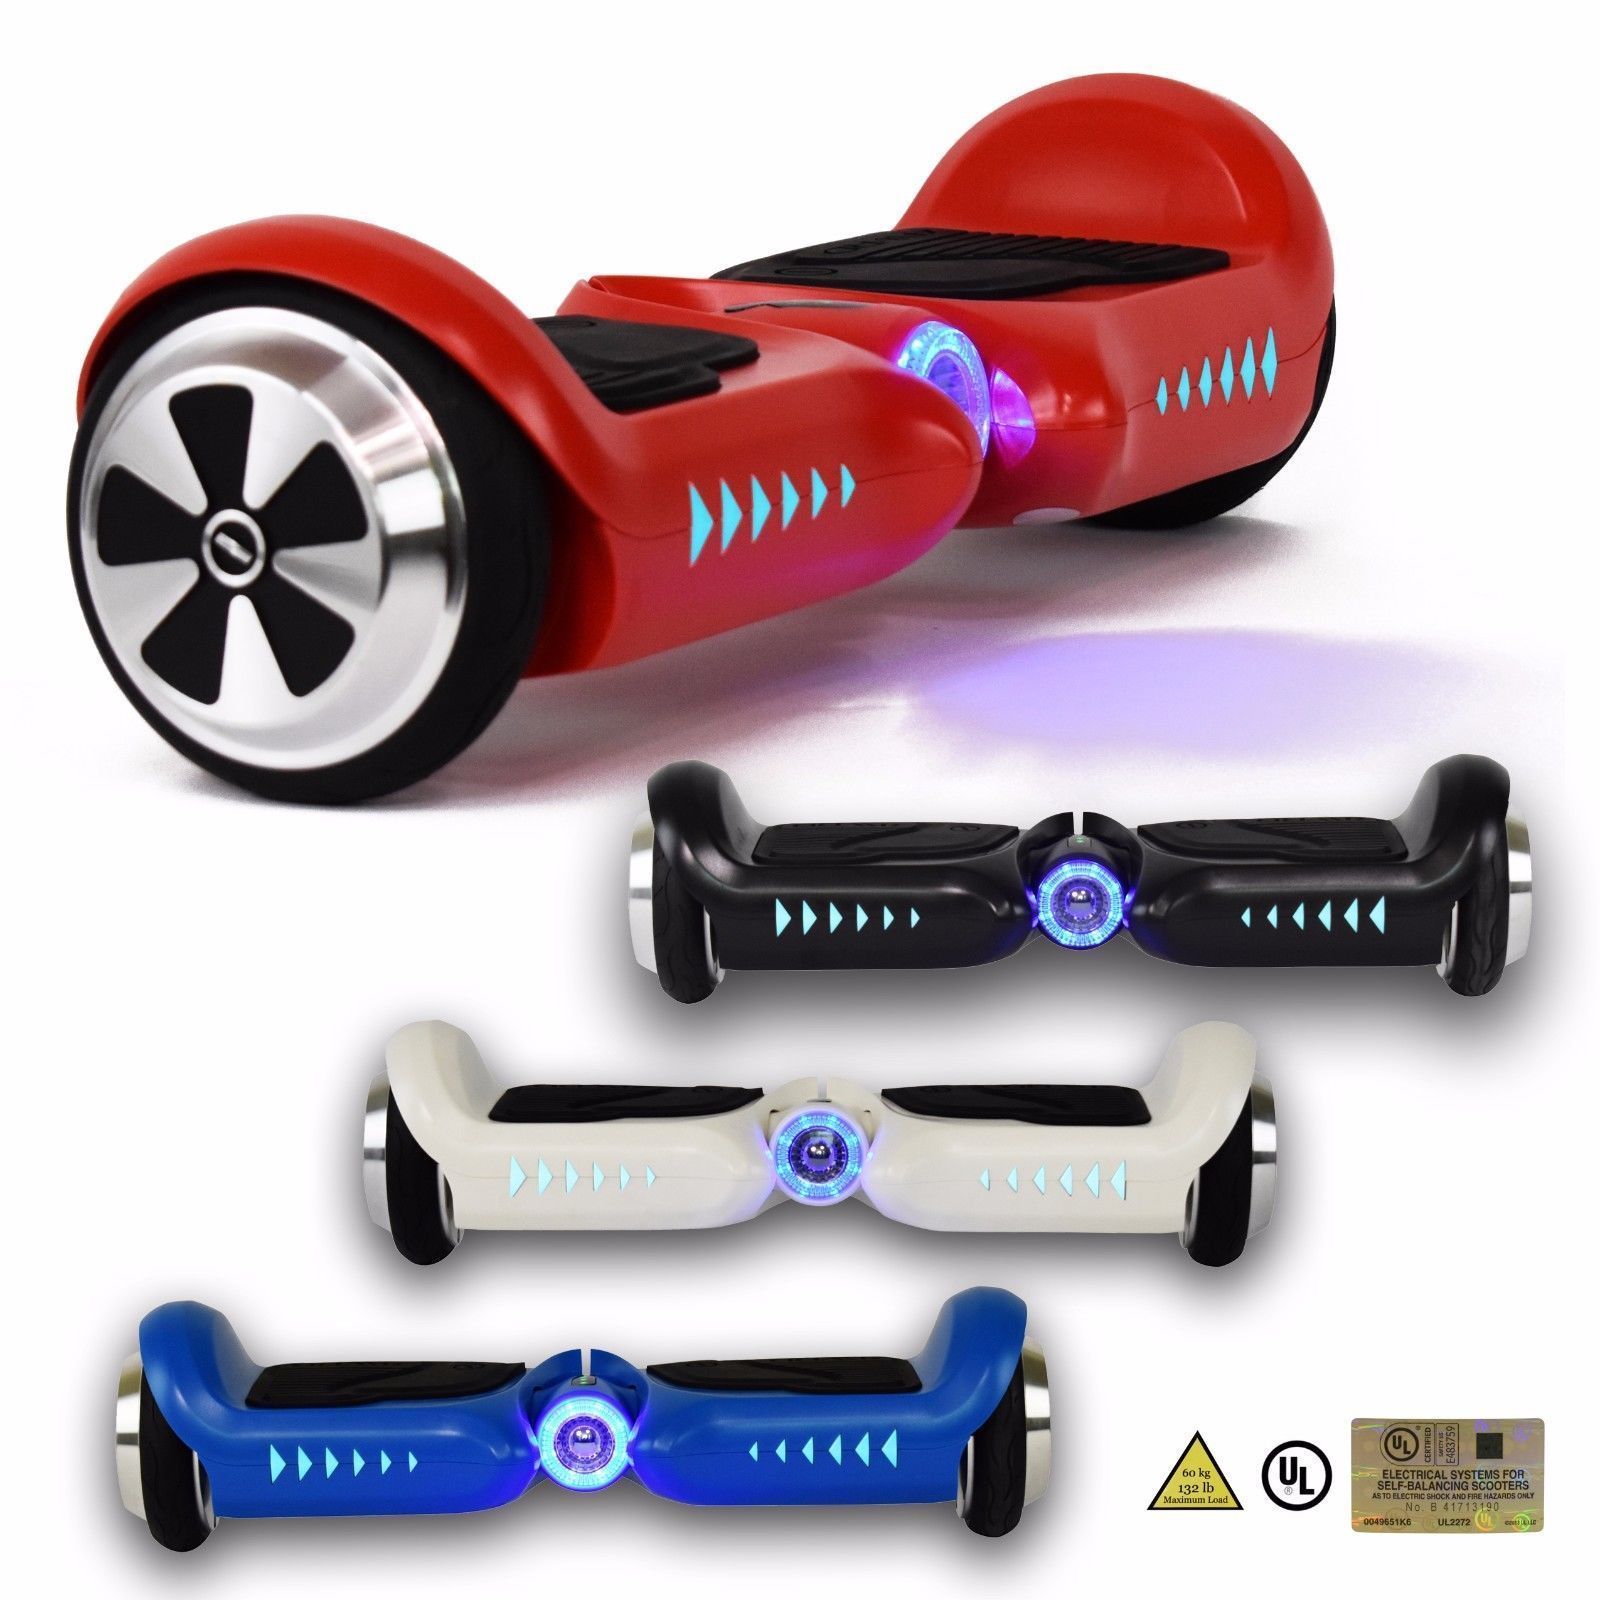 4.5" mini red hoverboard two wheel balance scooter UL2272 children safe  - $248.00